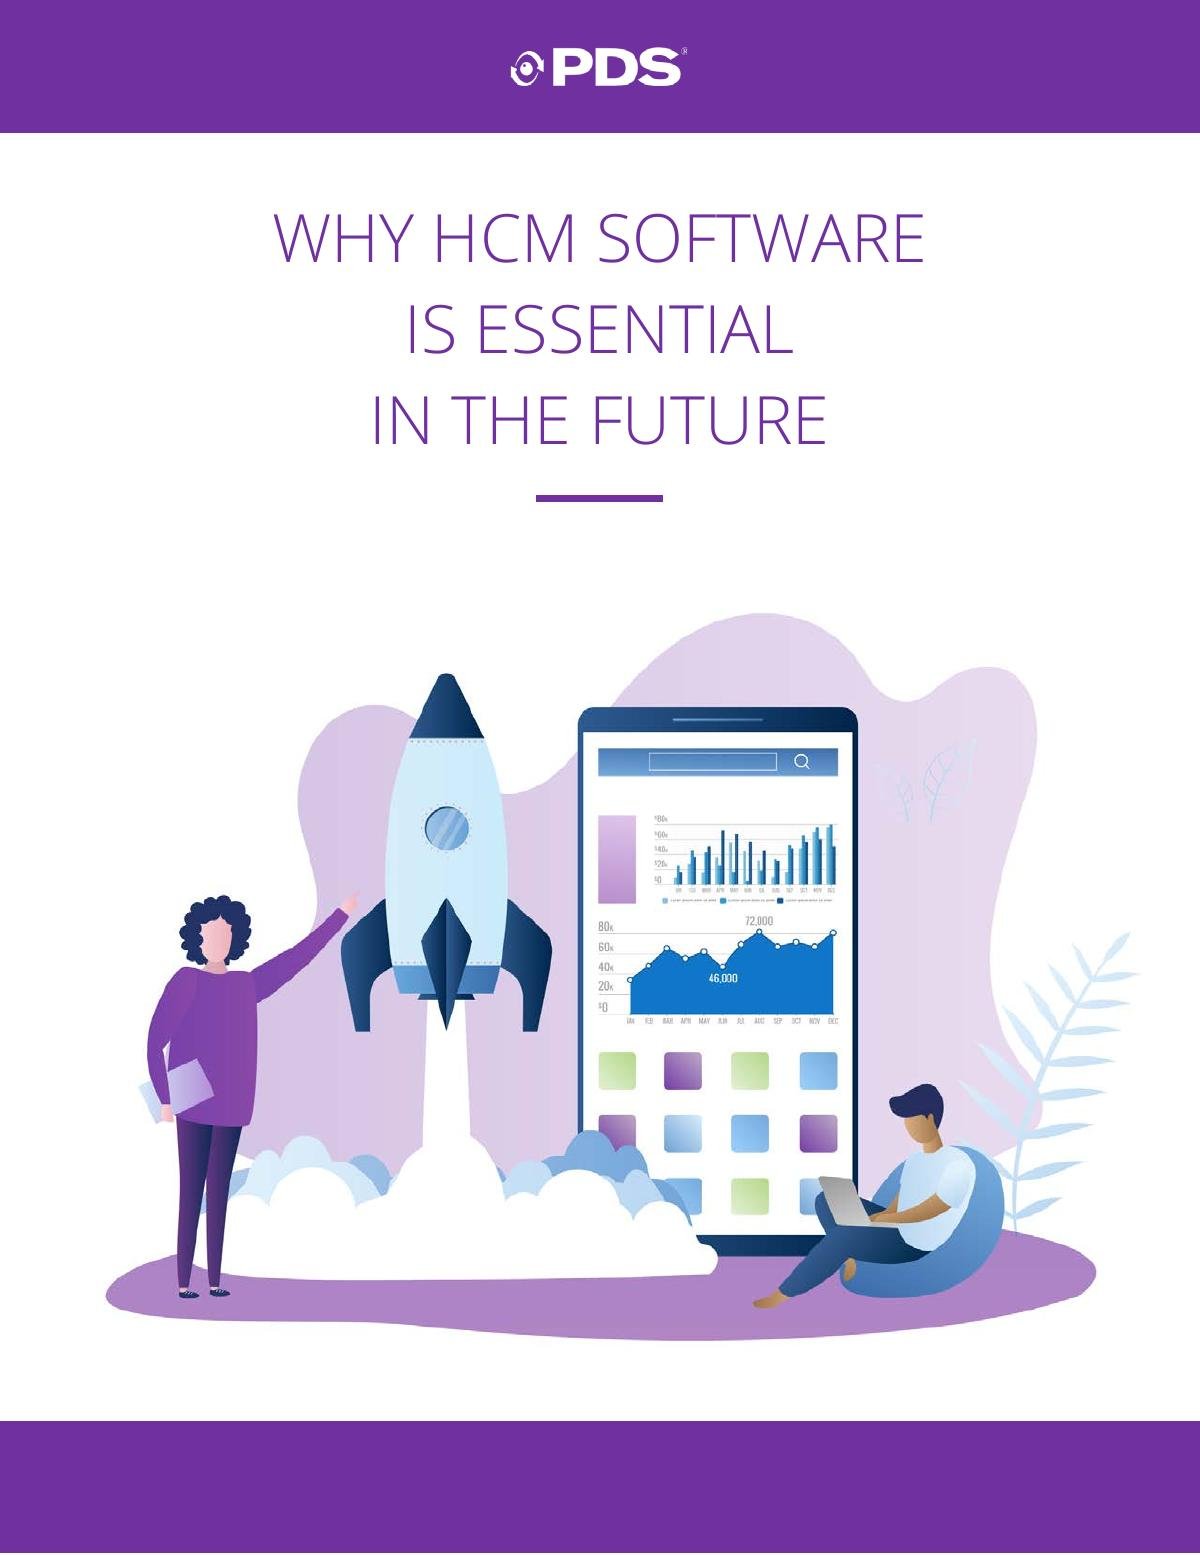 Why HCM Software is Essential in the Future